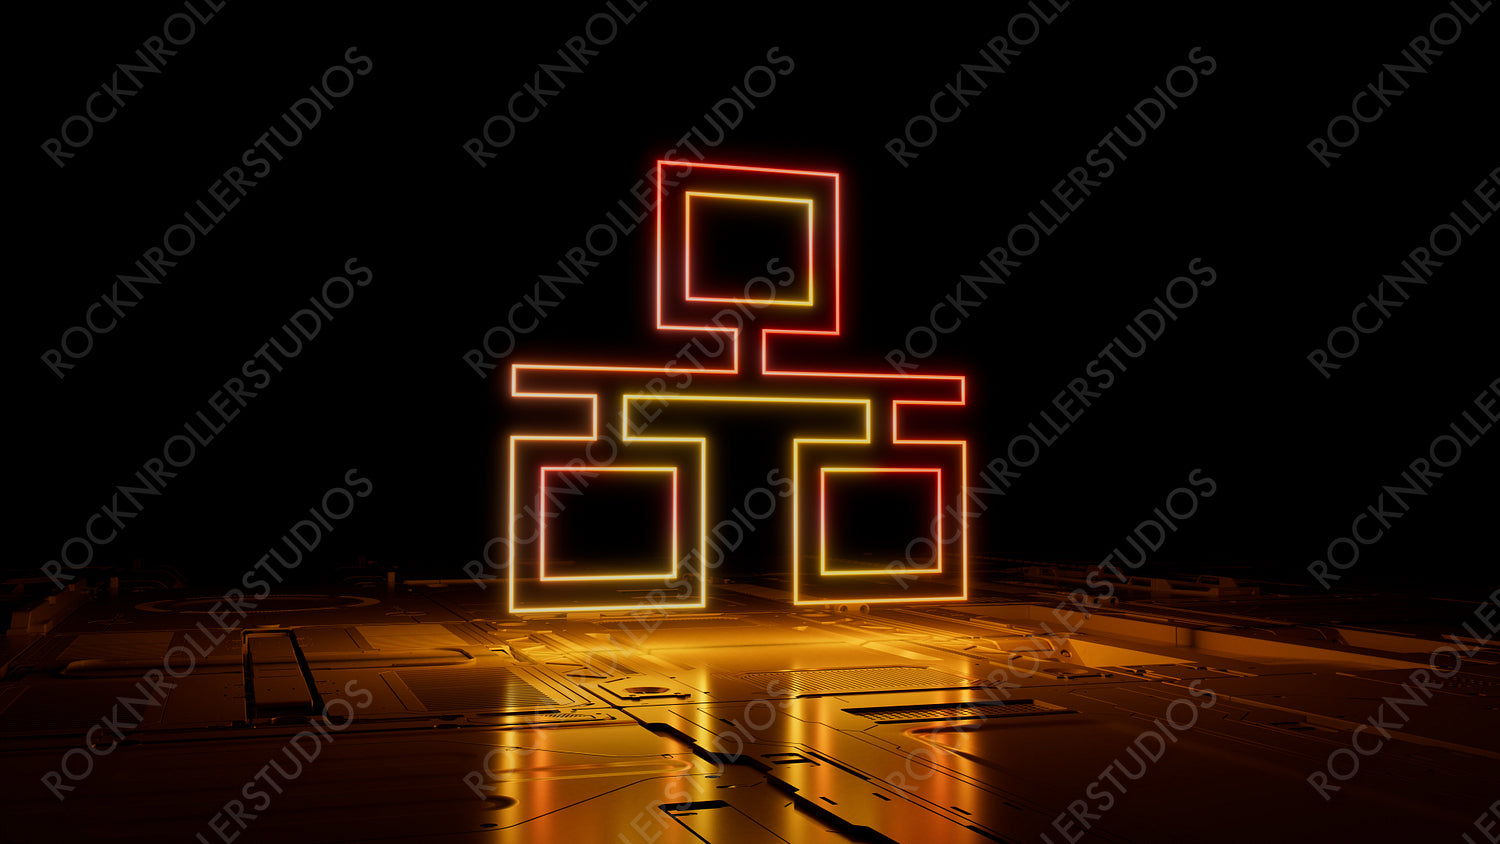 Orange and Yellow neon light ethernet icon. Vibrant colored Network technology symbol, on a black background with high tech floor. 3D Render